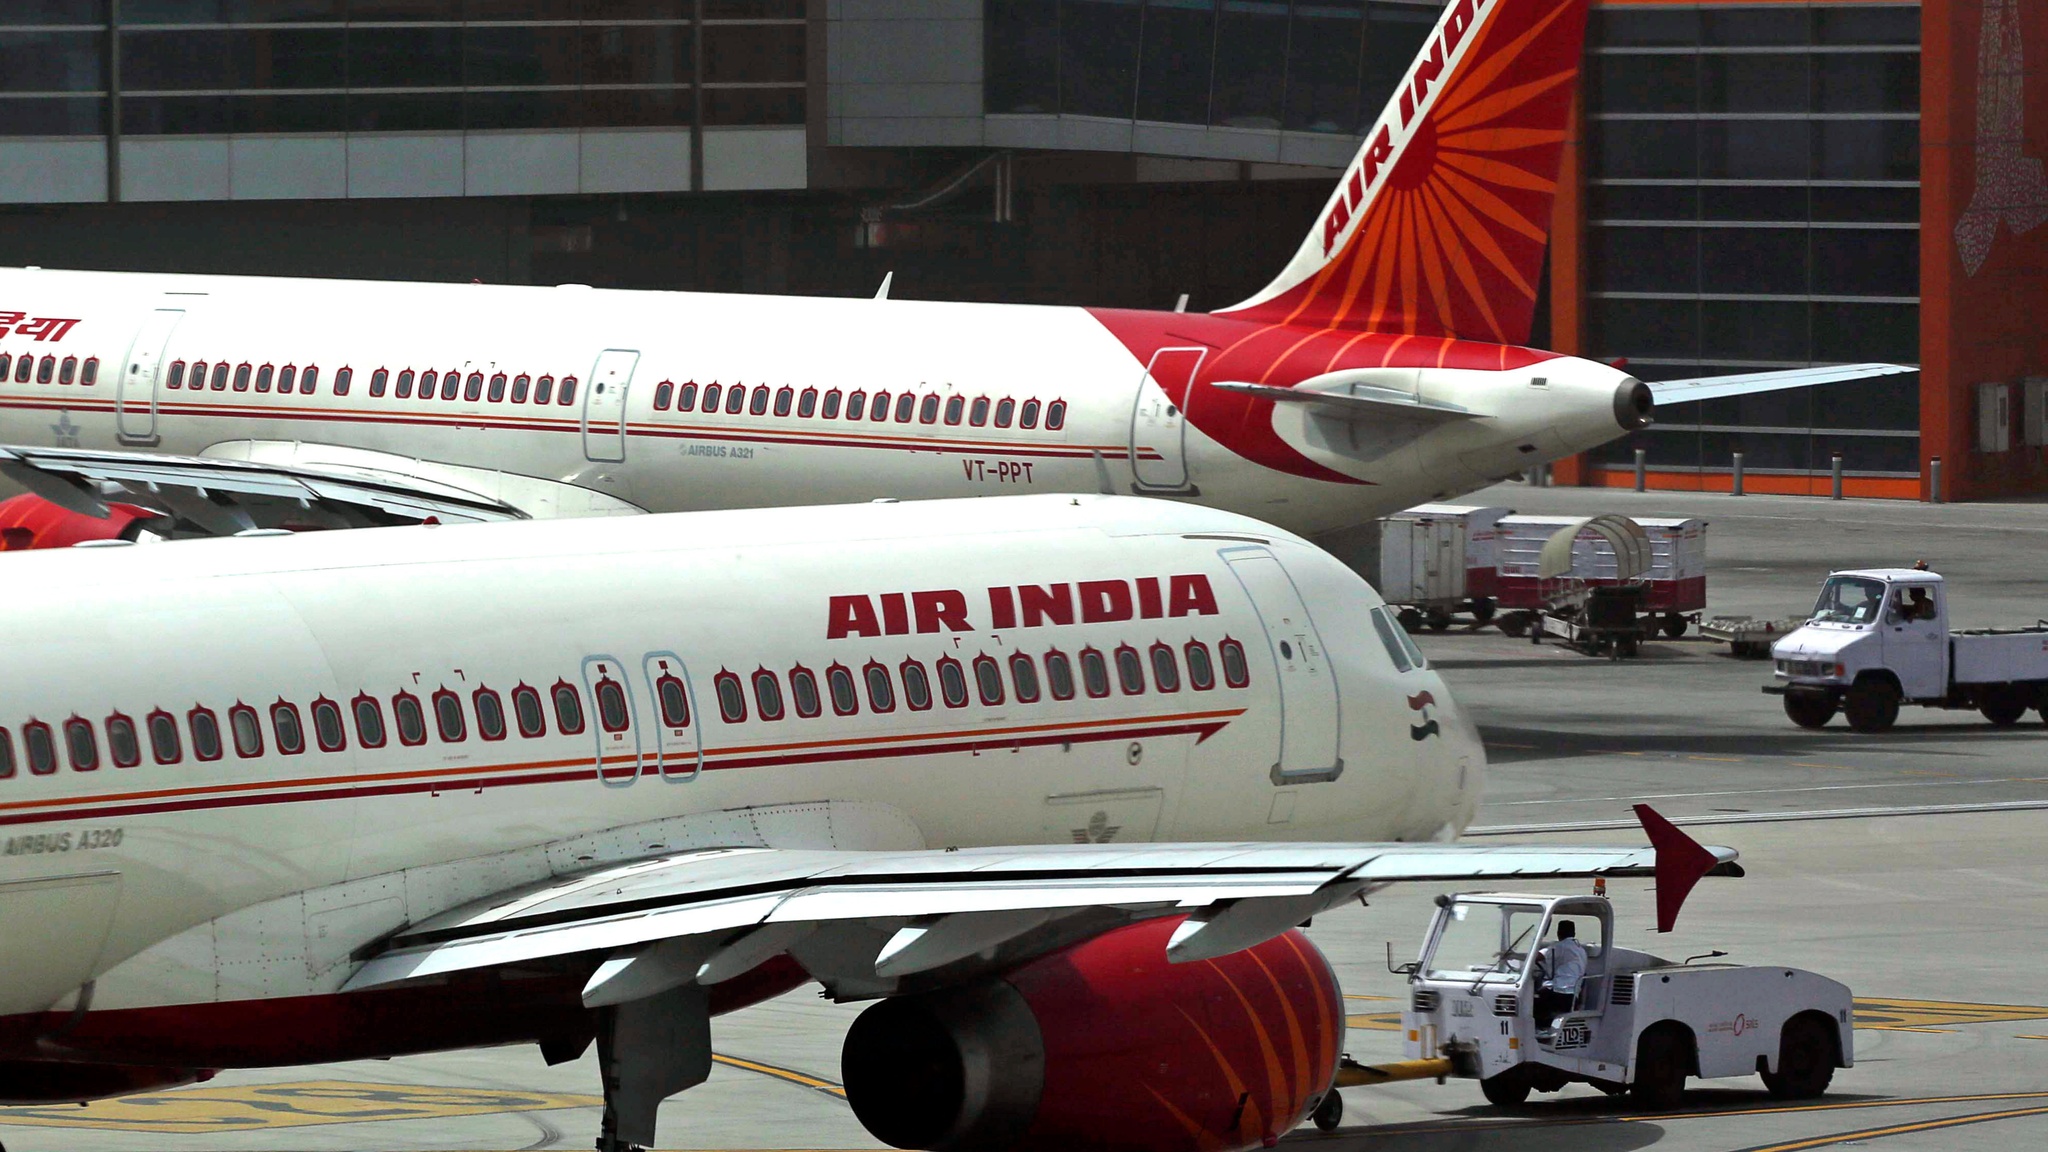 Air India ticketing ‘racket’ exposed because of Covid-19